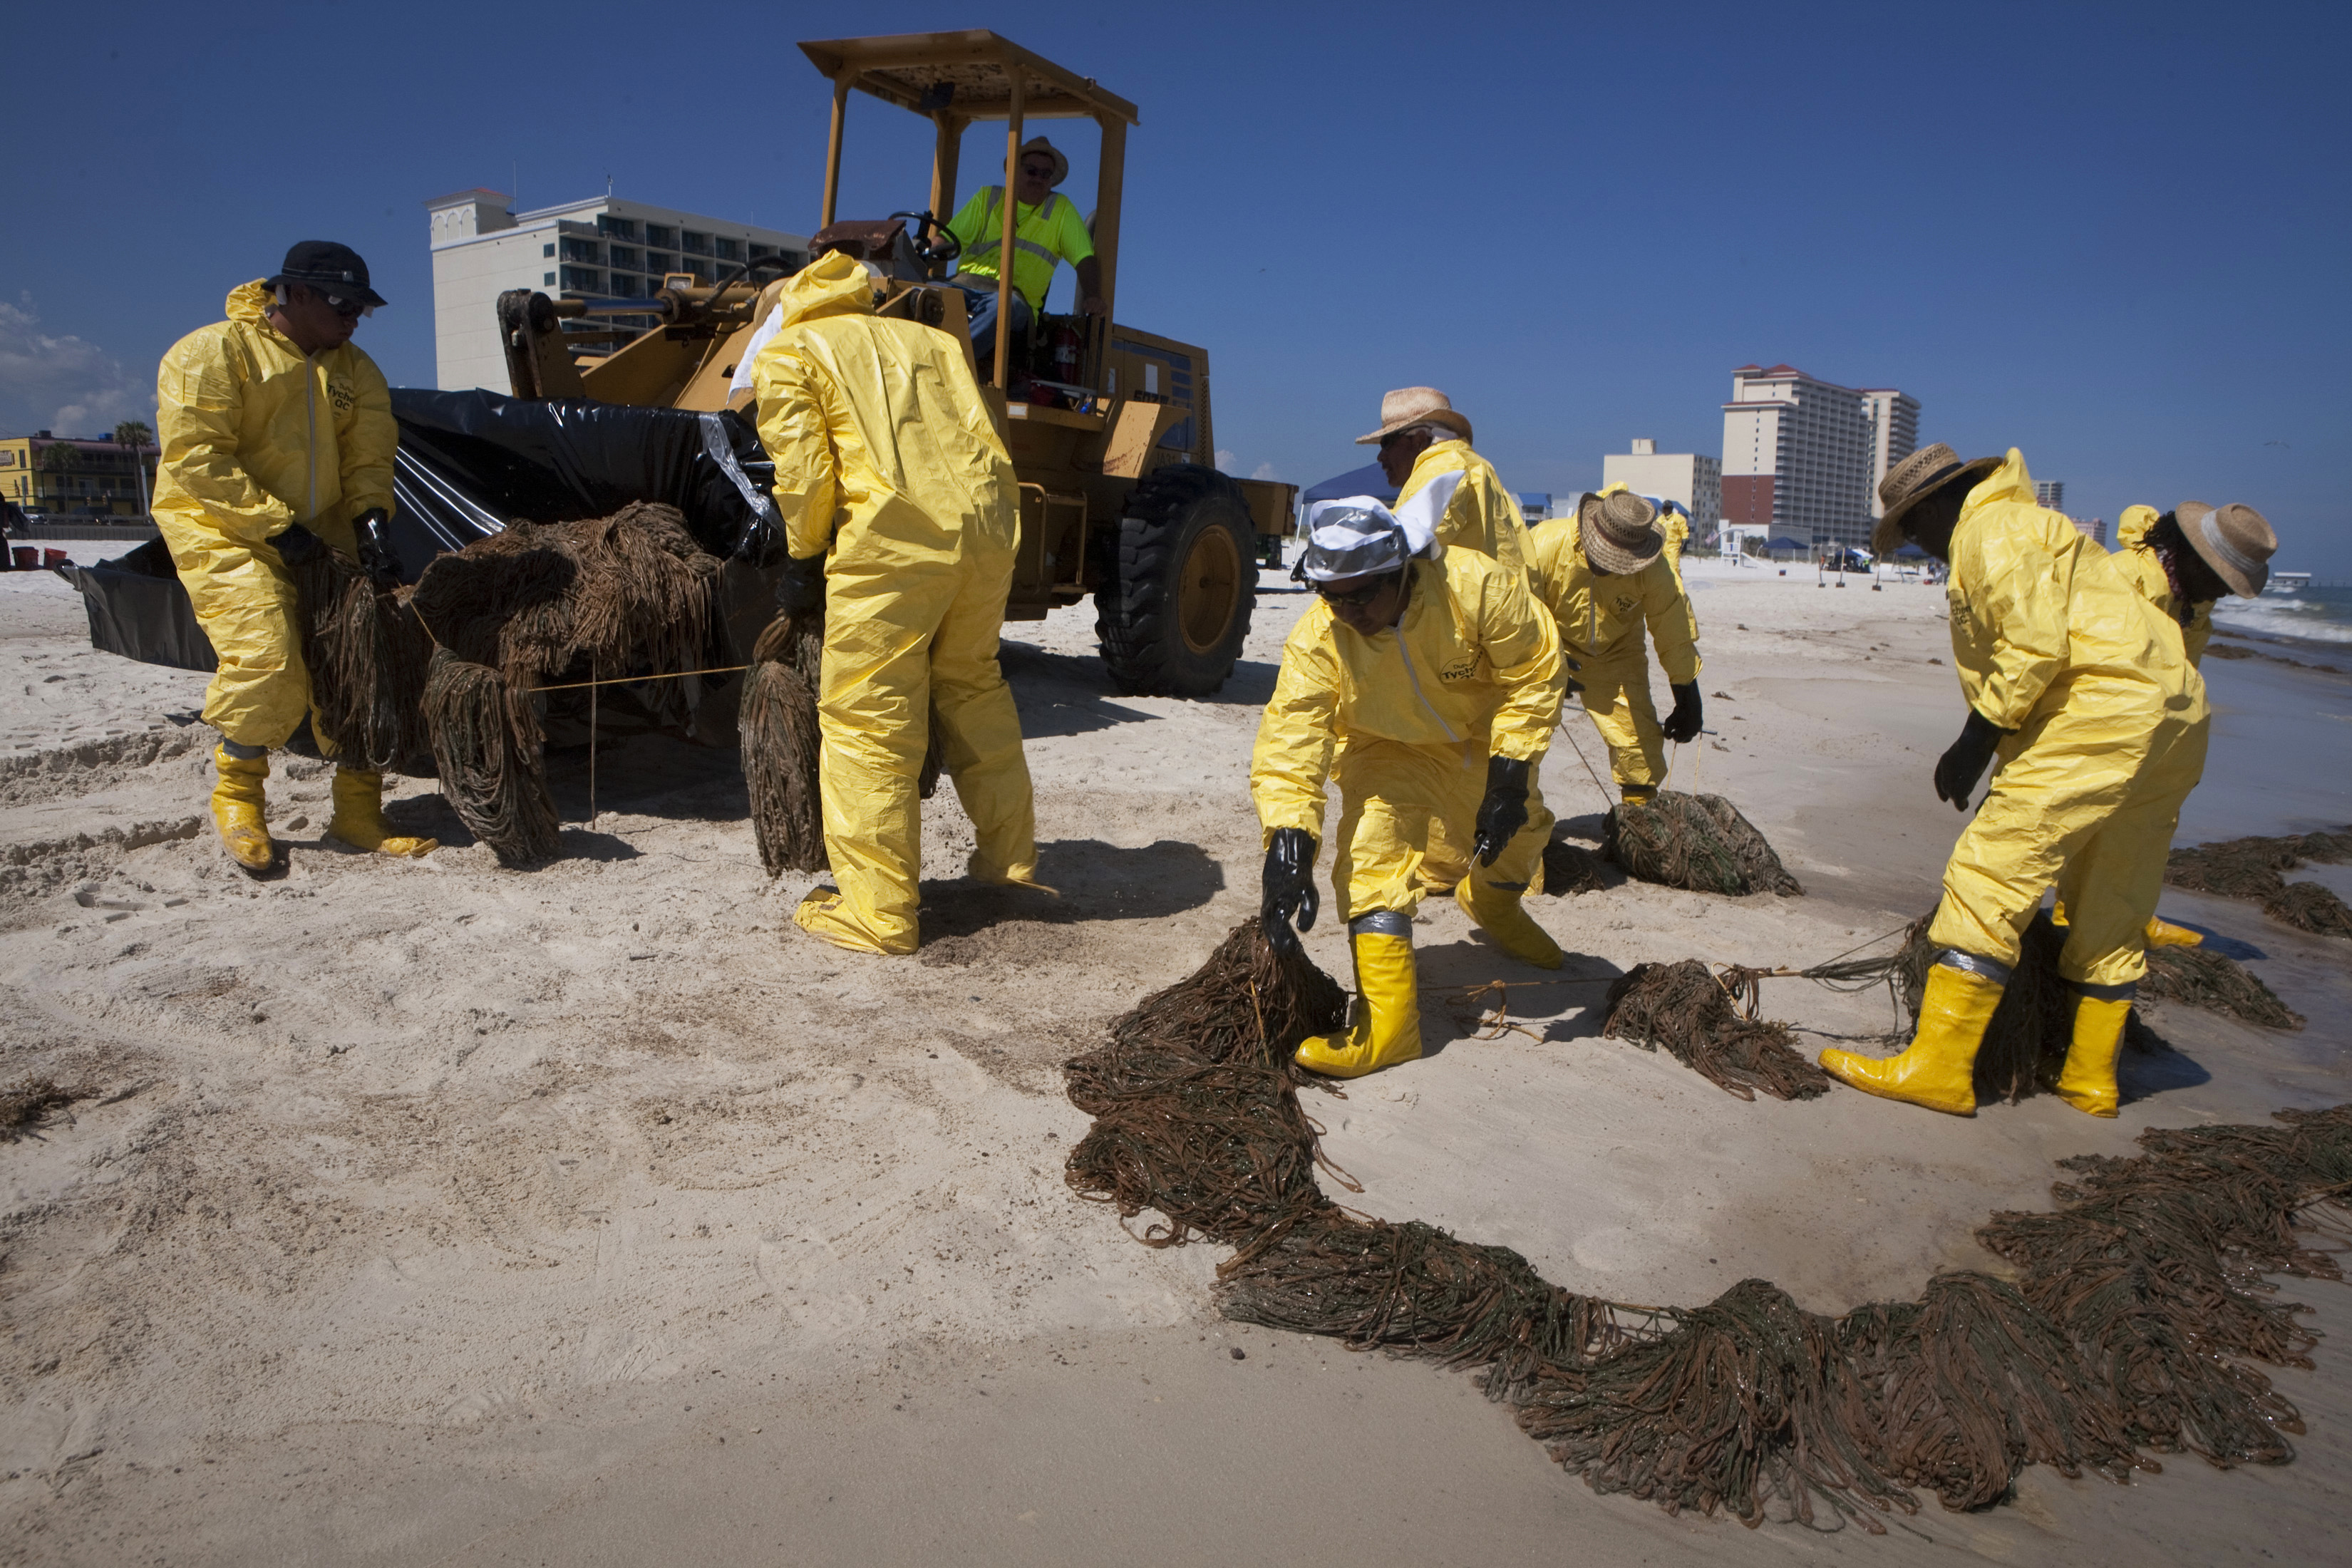 A clean-up crew collects booms soaked with oil from the Deepwater Horizon spill on a beach in Gulf Shores, Alabama, in this June 25, 2010 file photo. Clean-up workers say they're paid about $1000 per week after taxes, while boat operators can make over $1200, a lucrative, albeit short-term proposition. REUTERS/Lee Celano